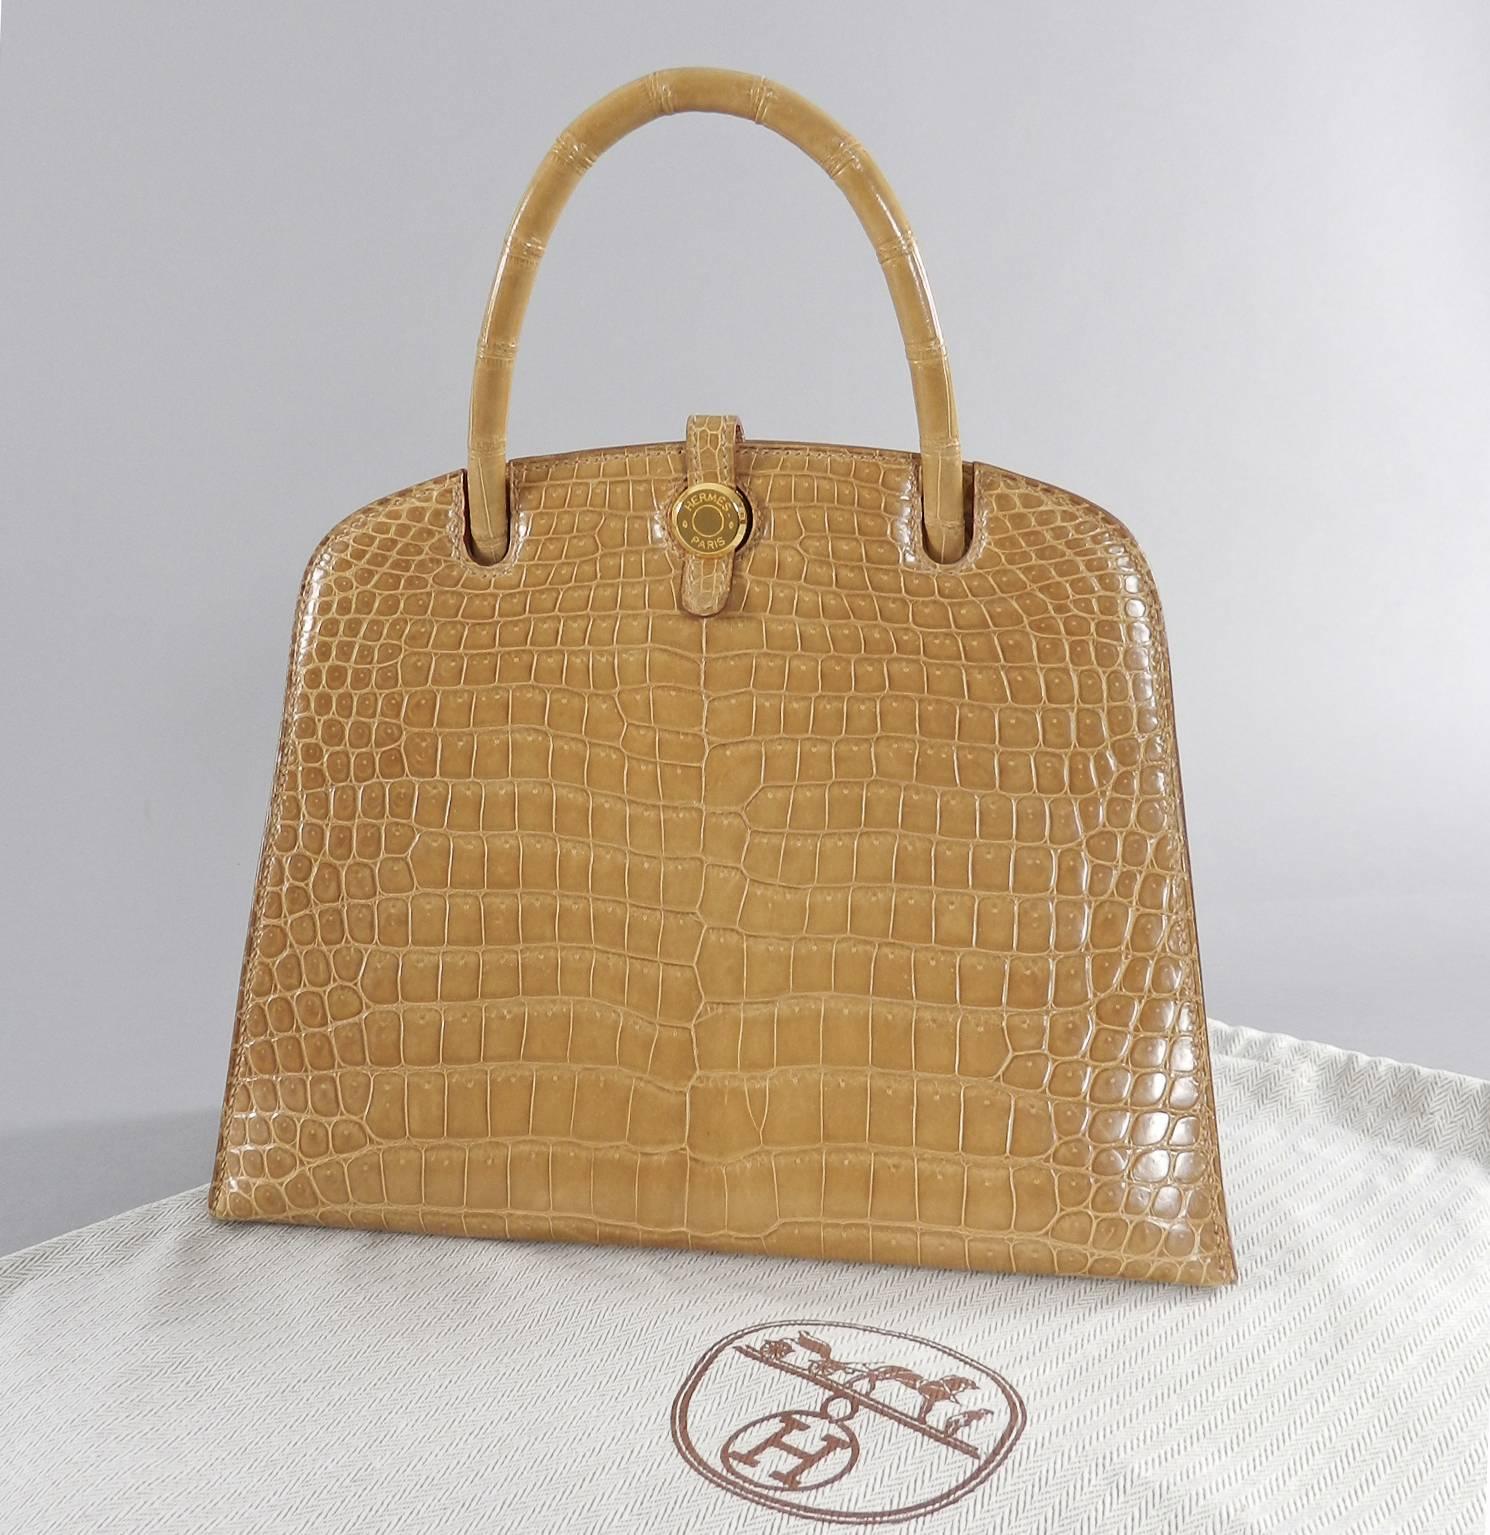 Hermes vintage 1998 beige crocodile dalvy 25cm bag.  Porosus crocodile marked with ^ symbol.  Date stamp B in square for 1998.  Excellent clean condition. Appears to have been stored and unused.  

We ship worldwide.